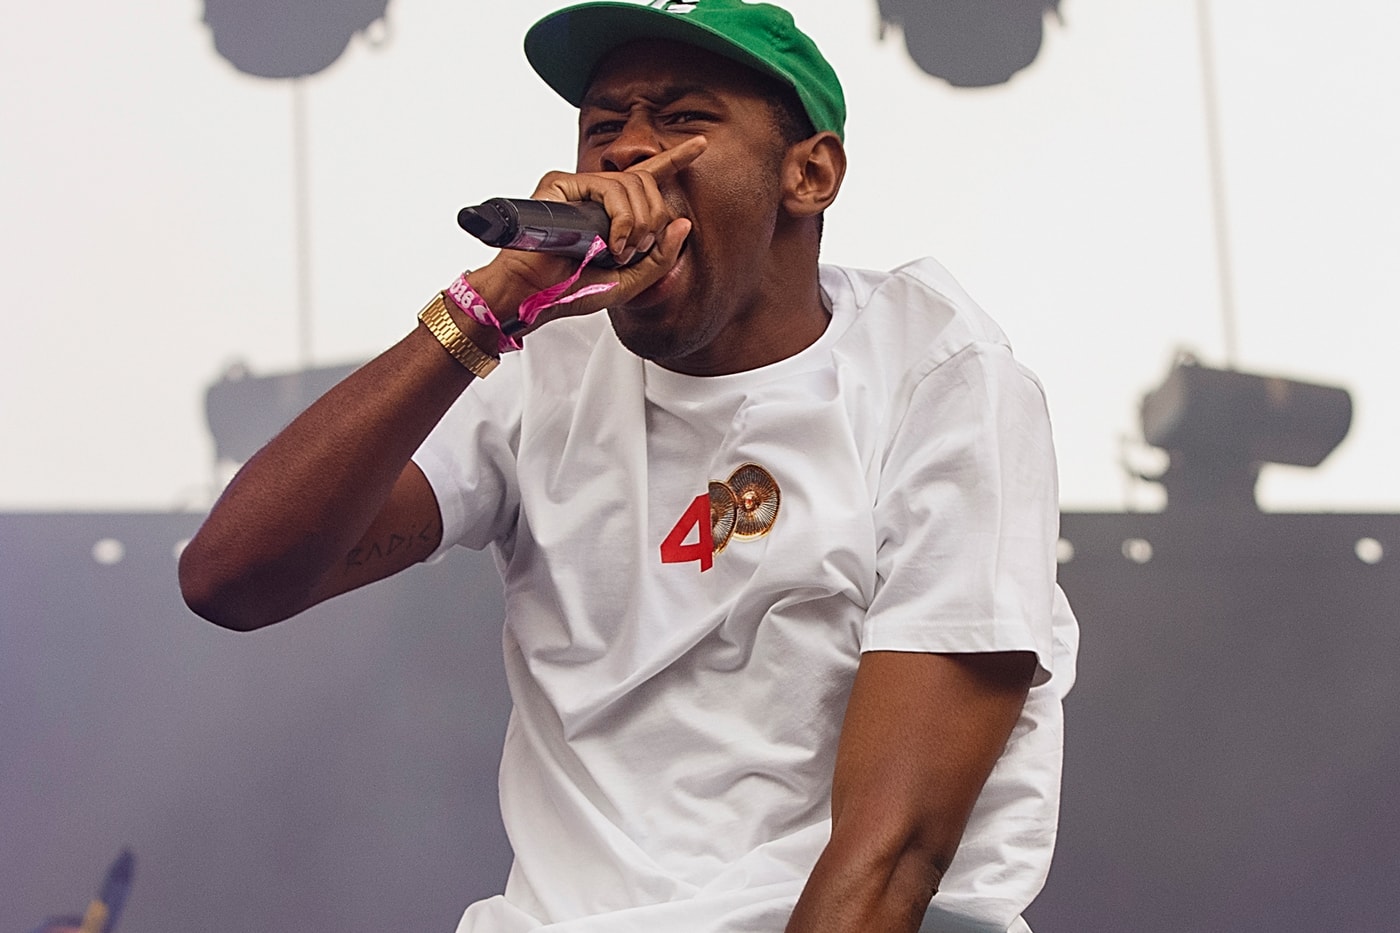 https://image-cdn.hypb.st/https%3A%2F%2Fhypebeast.com%2Fimage%2F2018%2F05%2Ftyler-the-creator-cooks-waffles-the-greatest-cooking-show-of-all-time-video-001.jpg?cbr=1&q=90